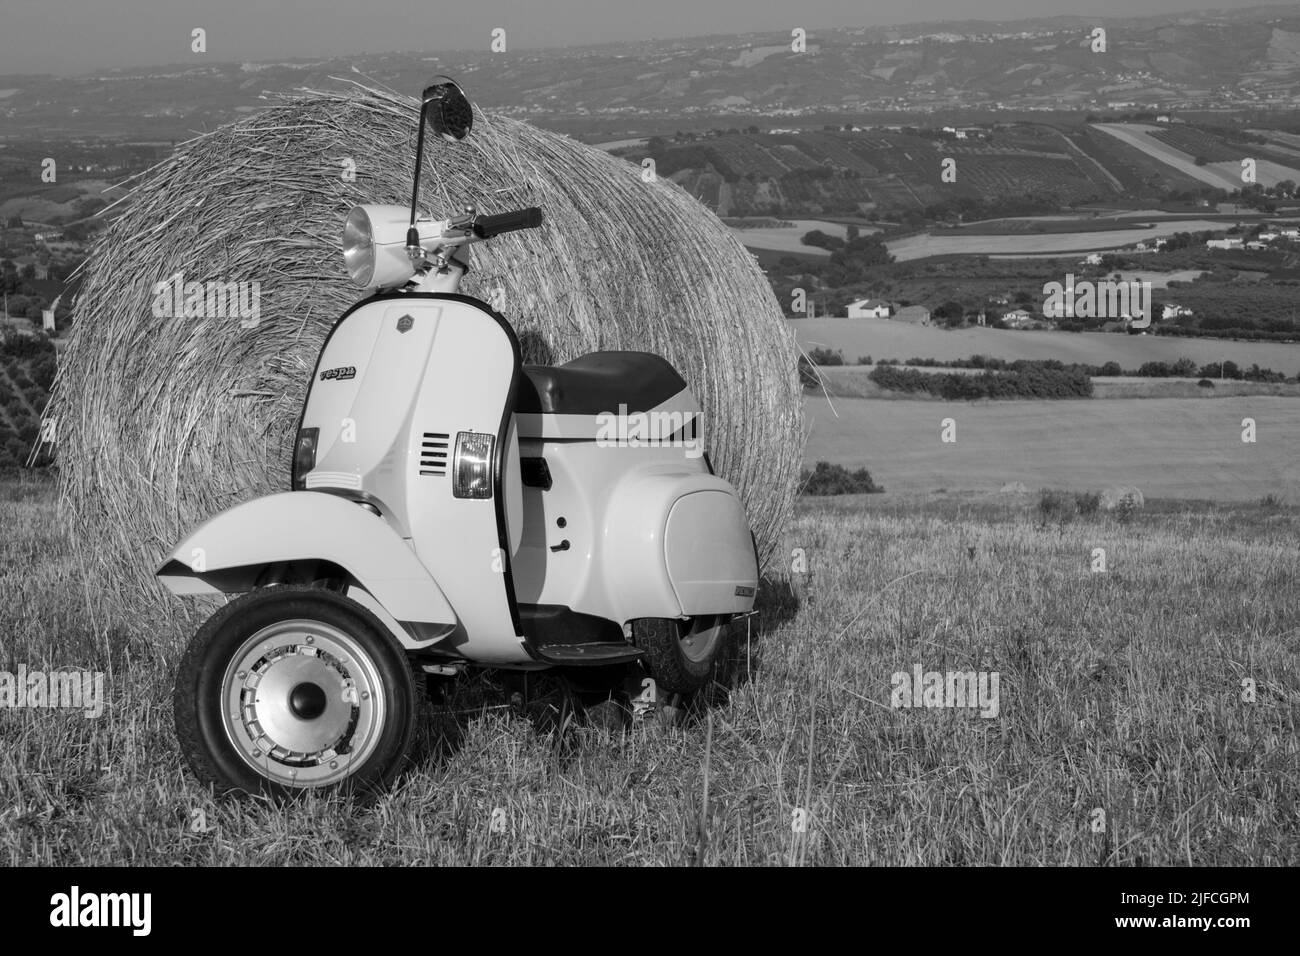 Image of an old Piaggio vespa motorcycle parked in a field with straw bales and stunning view in the background. Black and white photos. Stock Photo